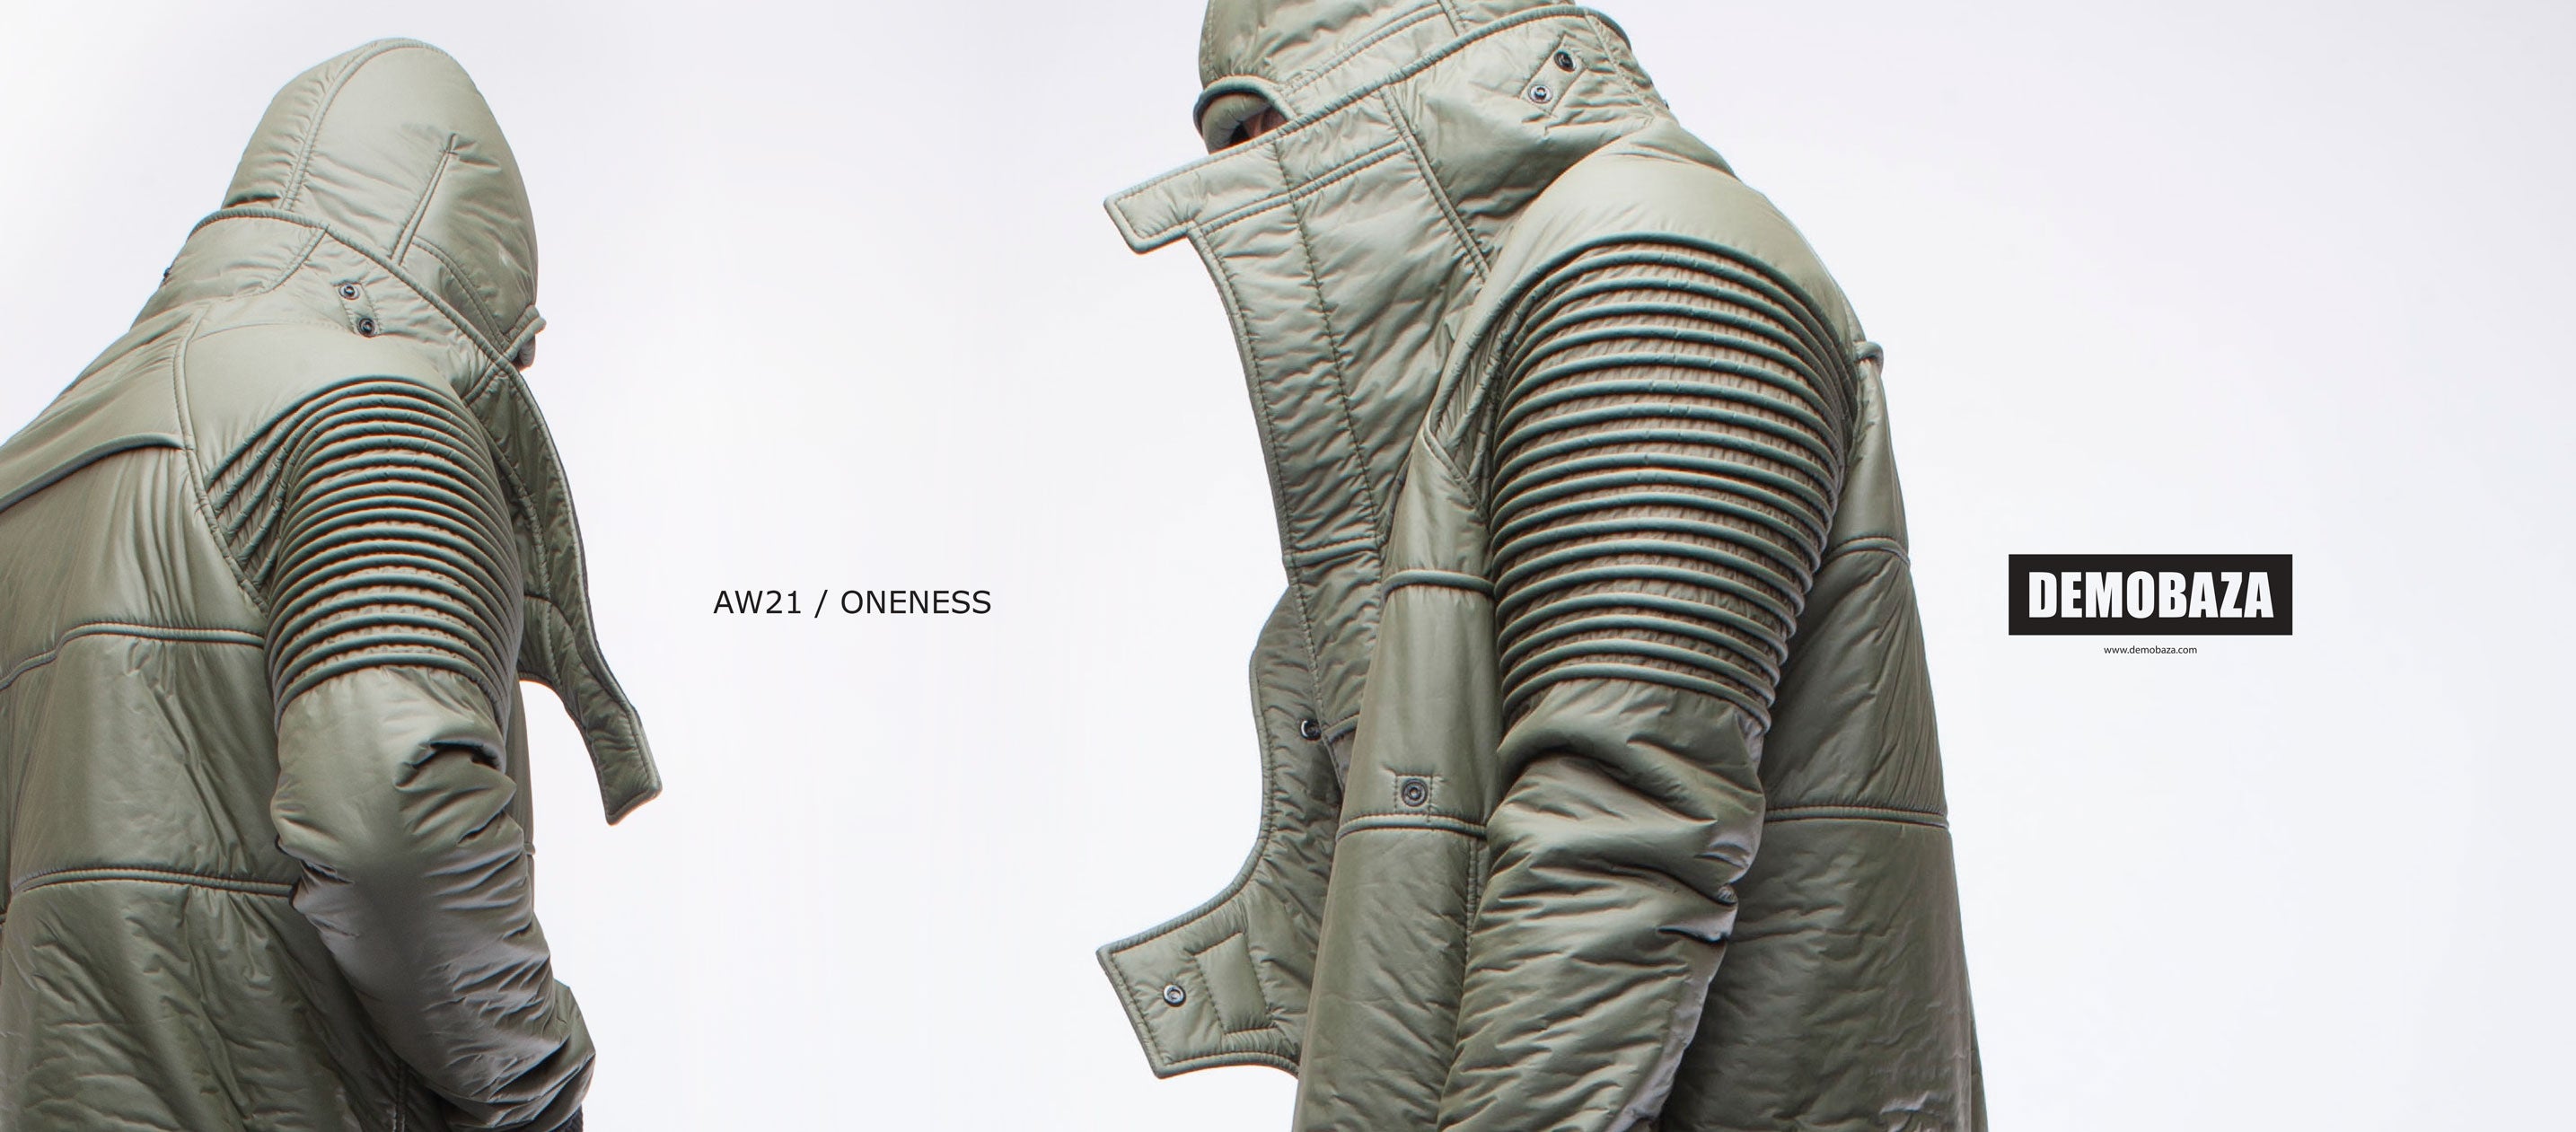 MAN AW21 / ONENESS